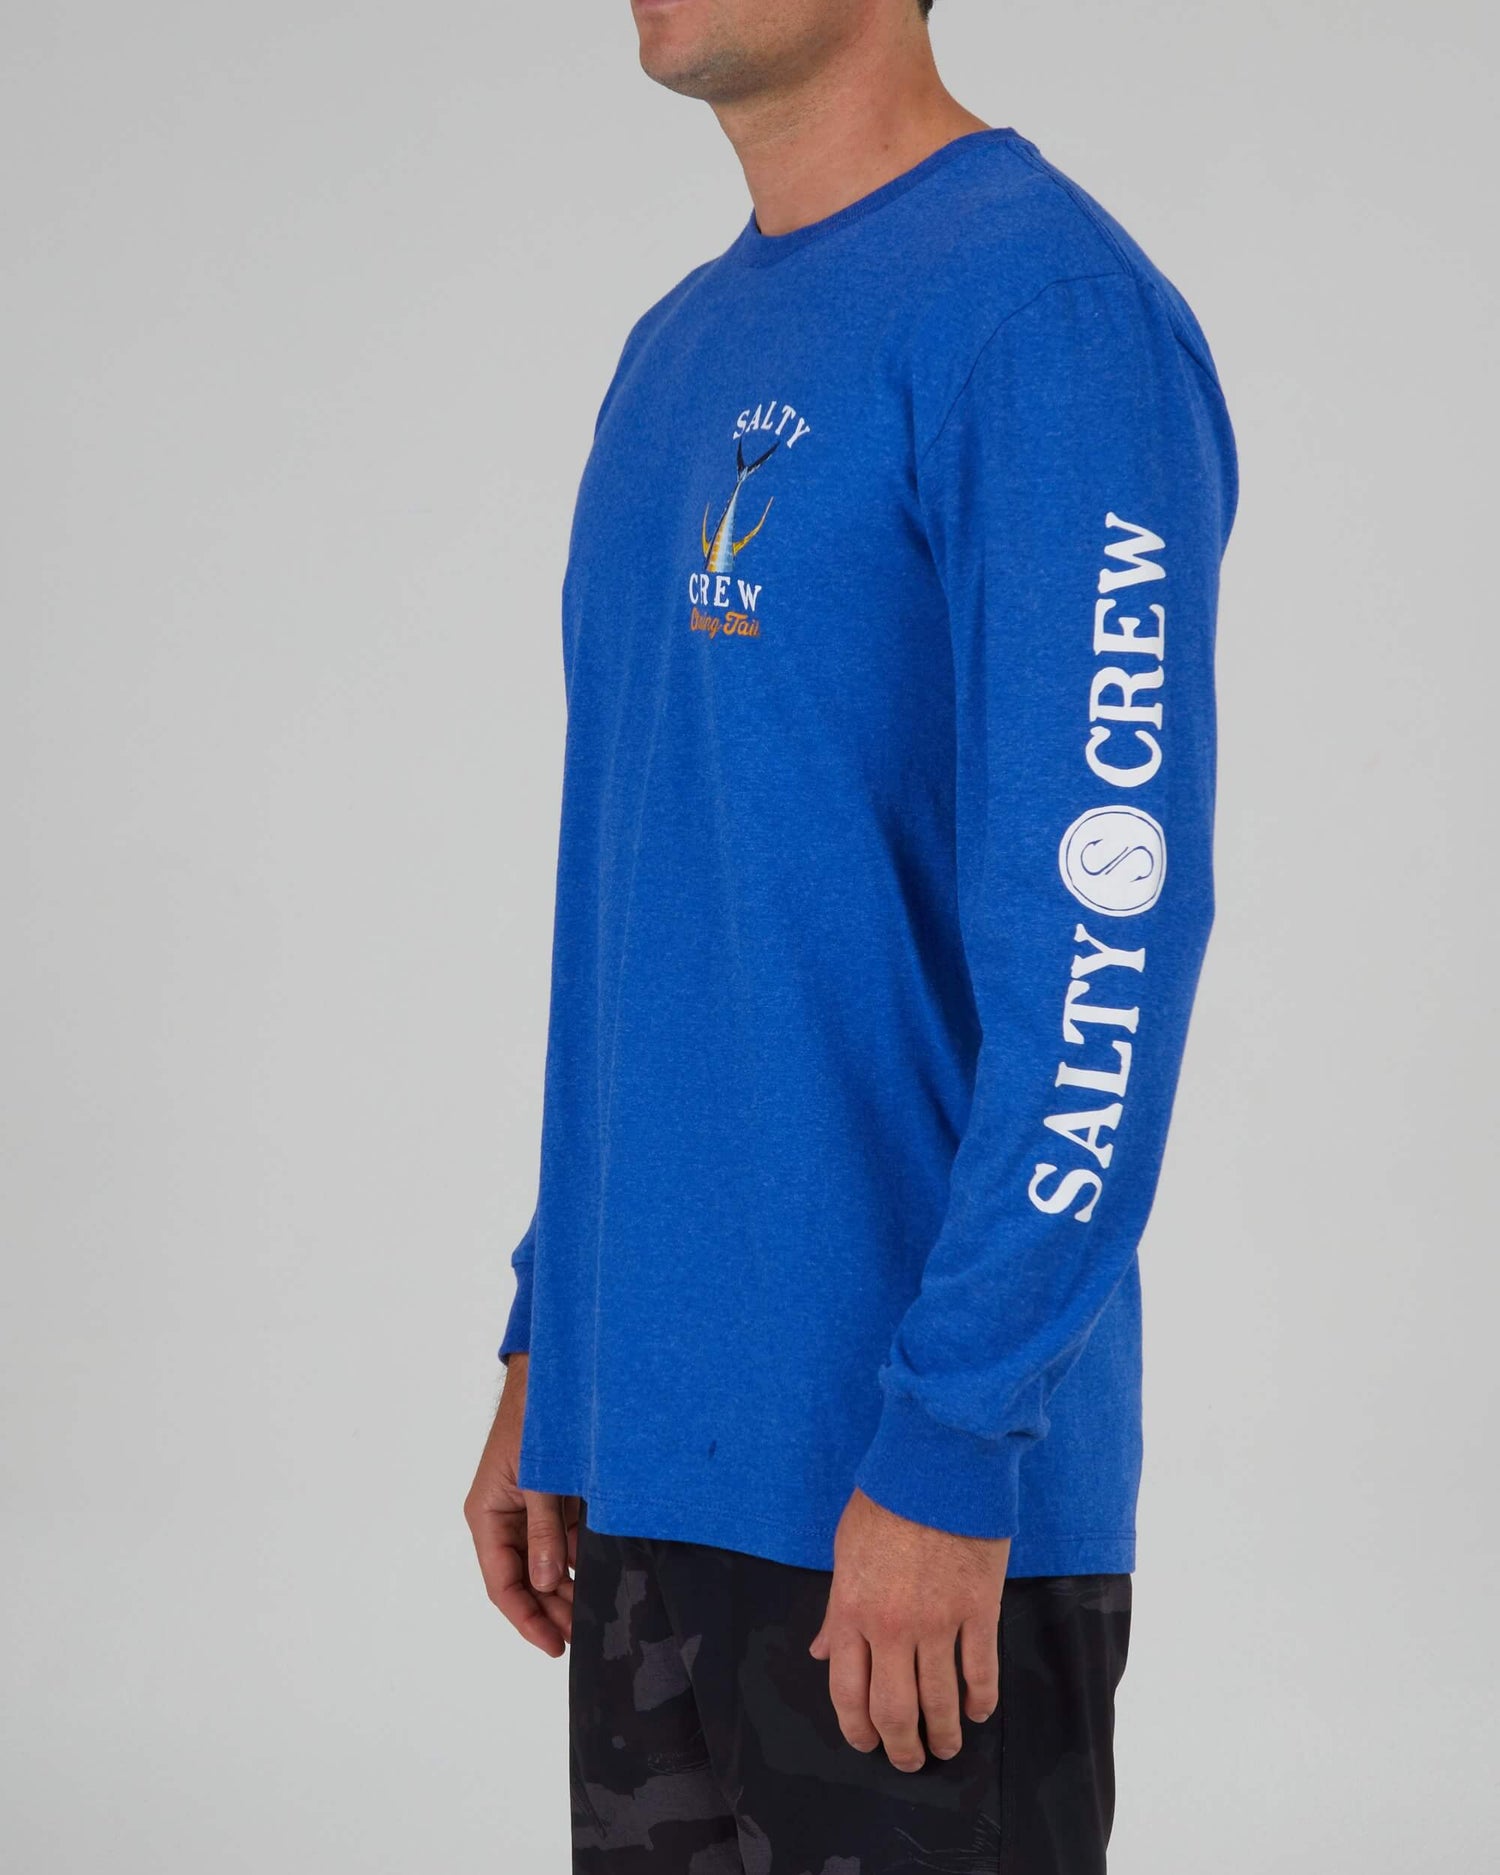 Salty crew T-SHIRTS L/S Tailed L/S - Royal Heather in Royal Heather